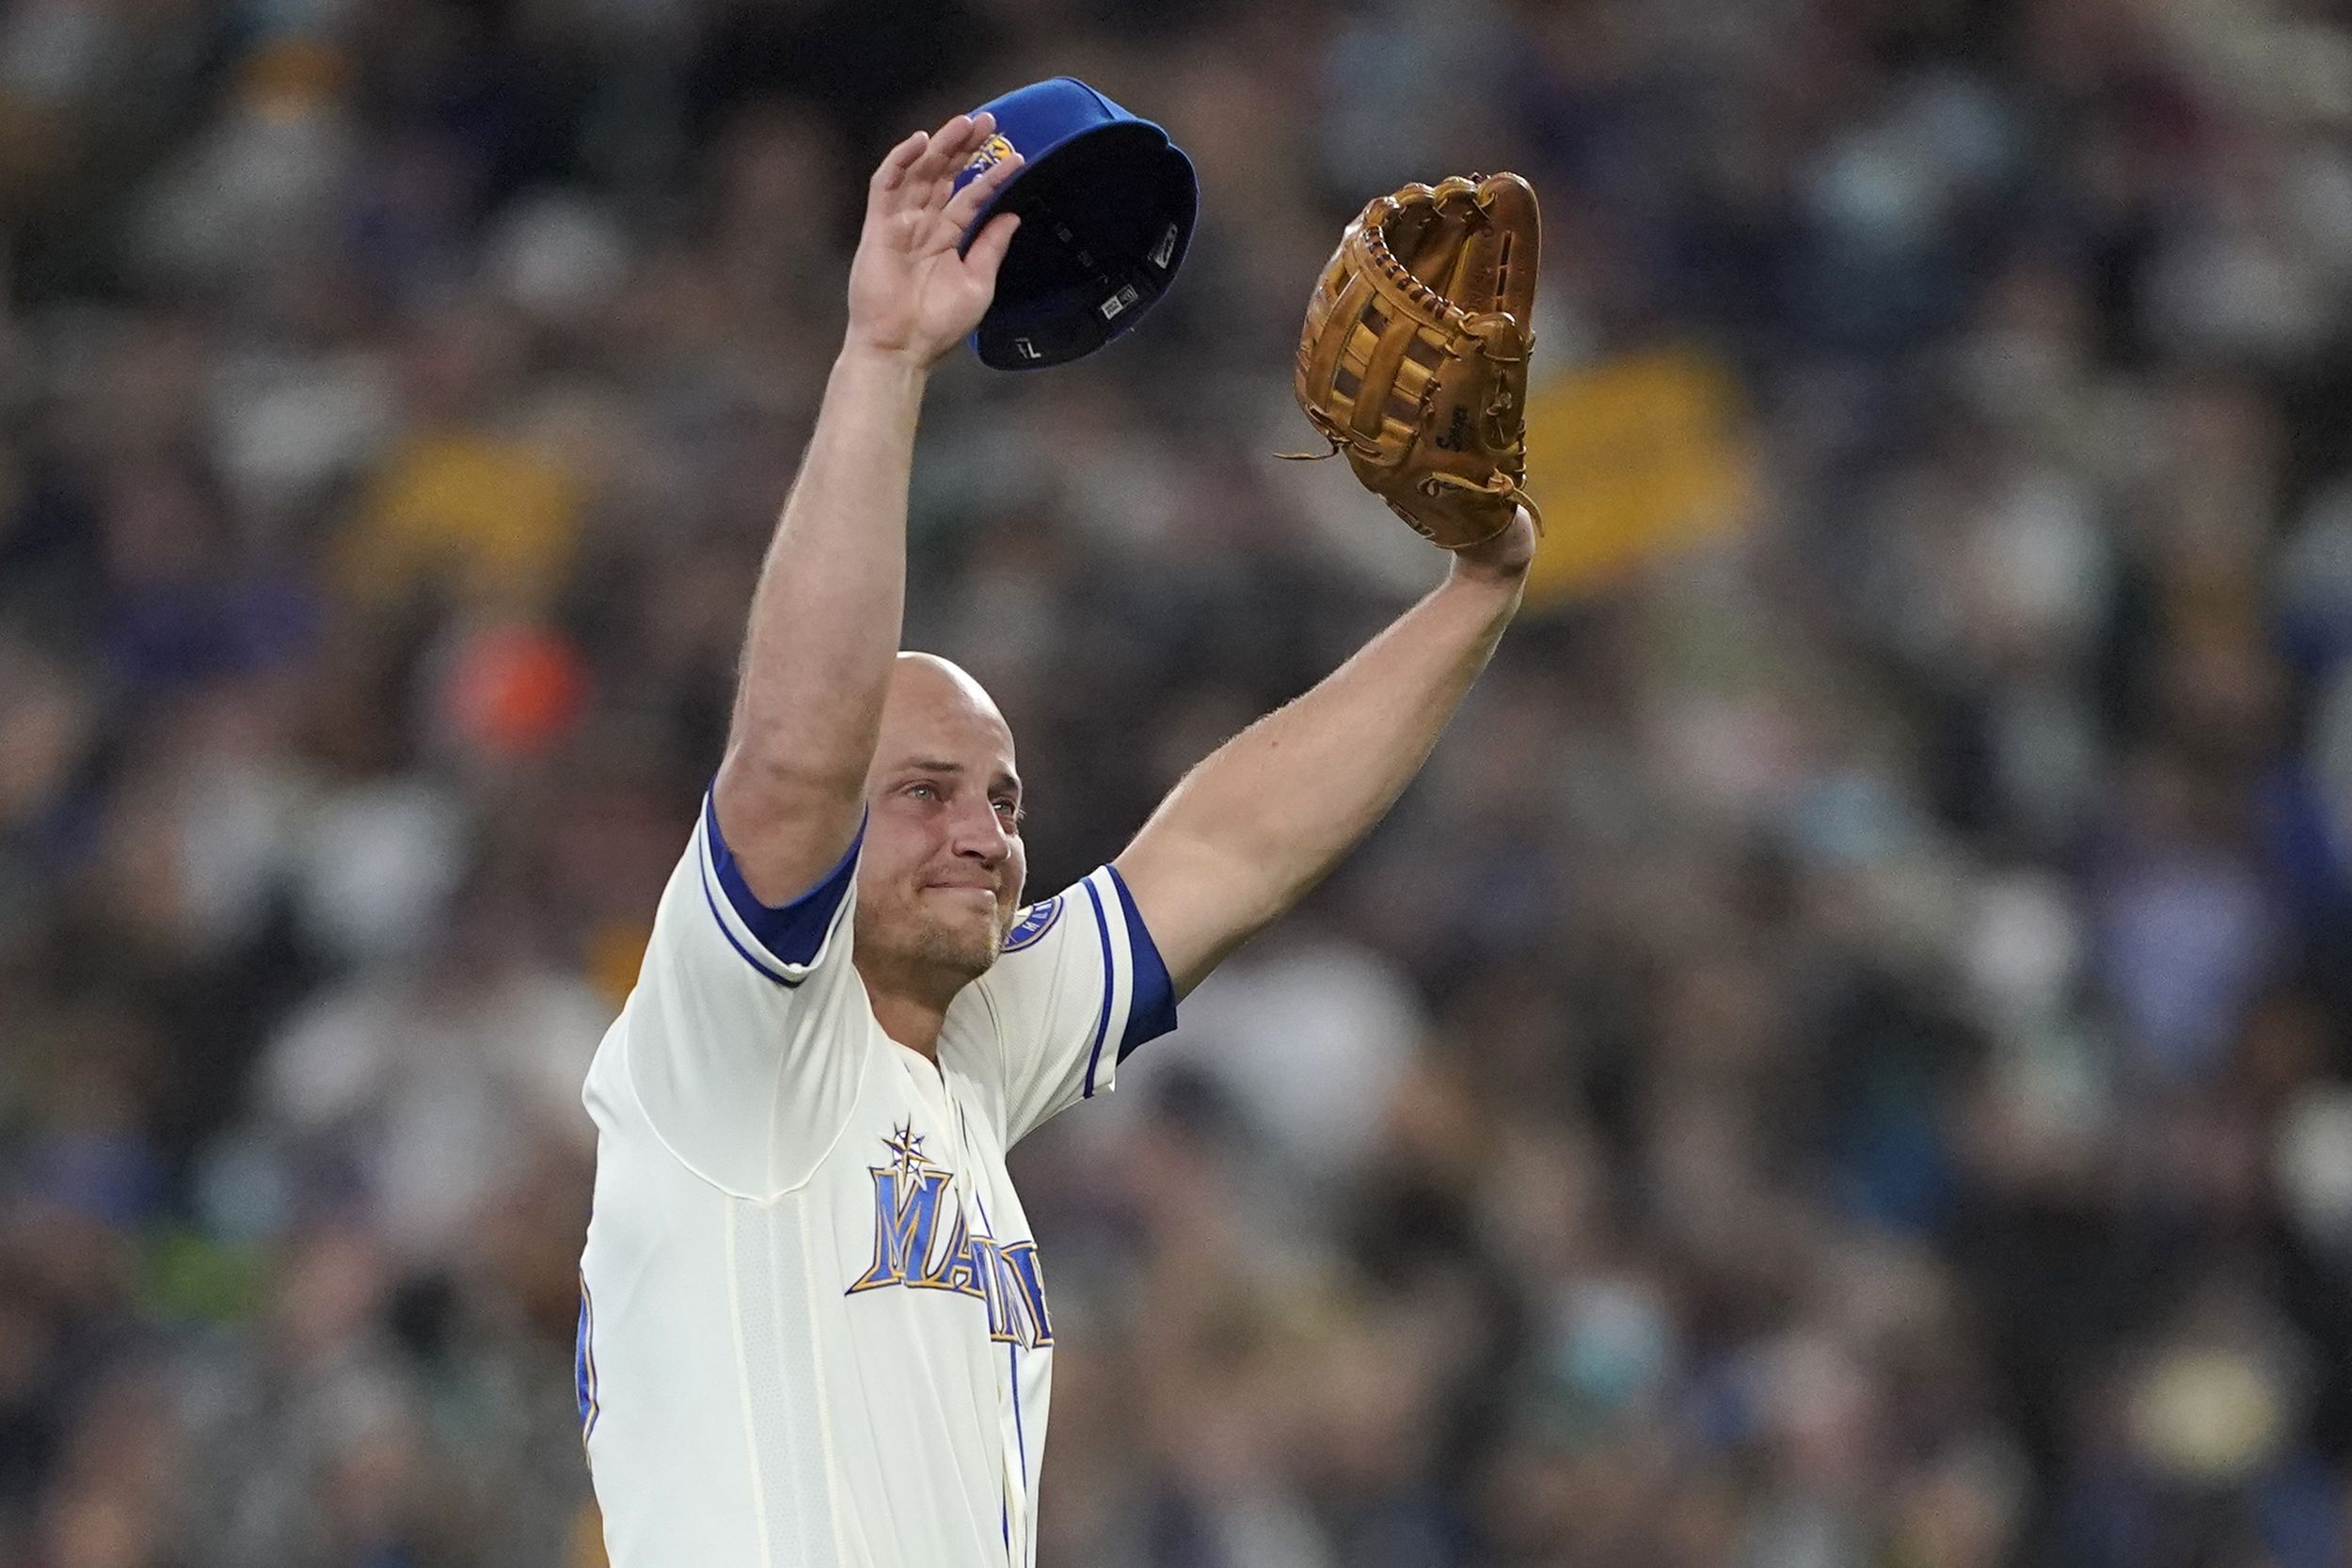 Crue Seager, the son of Seattle Mariners third baseman Kyle Seager throws  out the first pitch of a baseball game against the Los Angeles Angels,  Sunday, Oct. 3, 2021, in Seattle. (AP